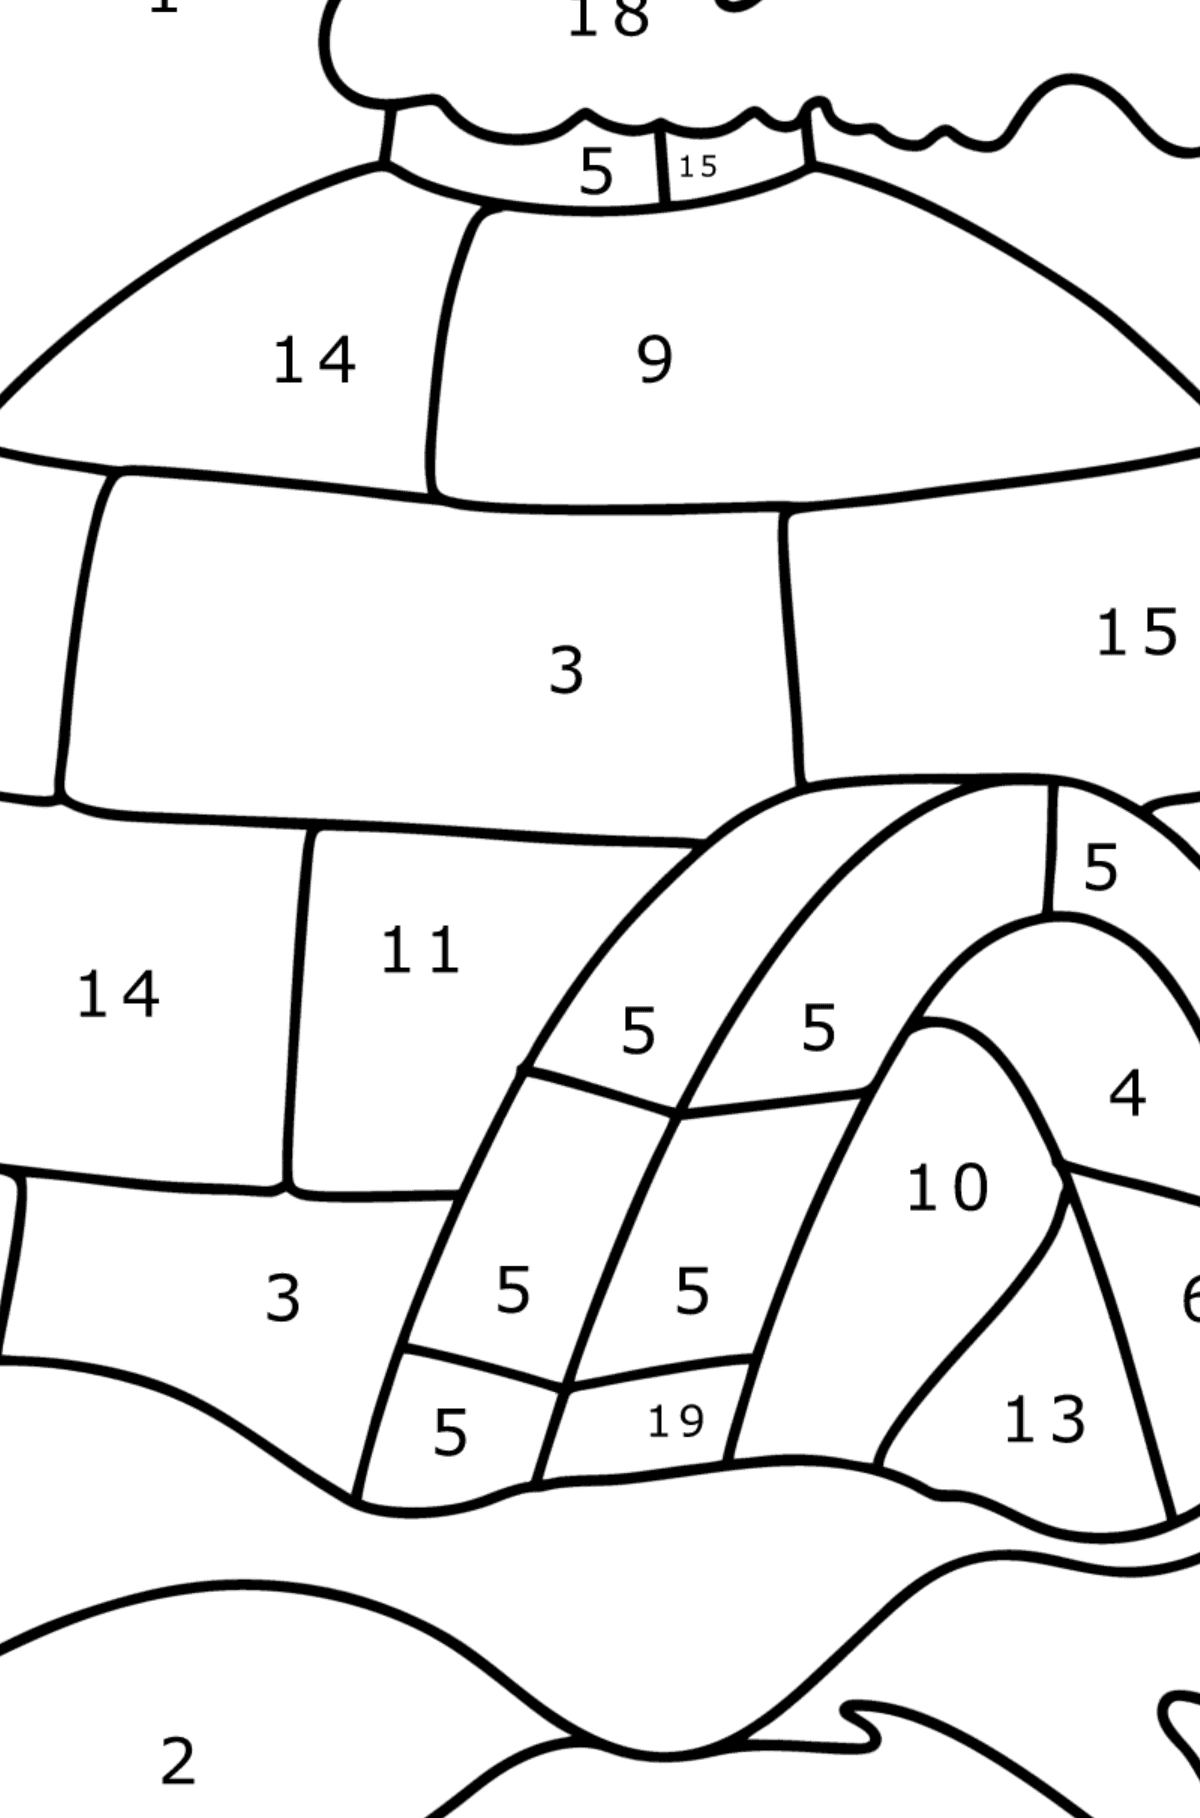 Igloo ice House coloring page - Coloring by Numbers for Kids